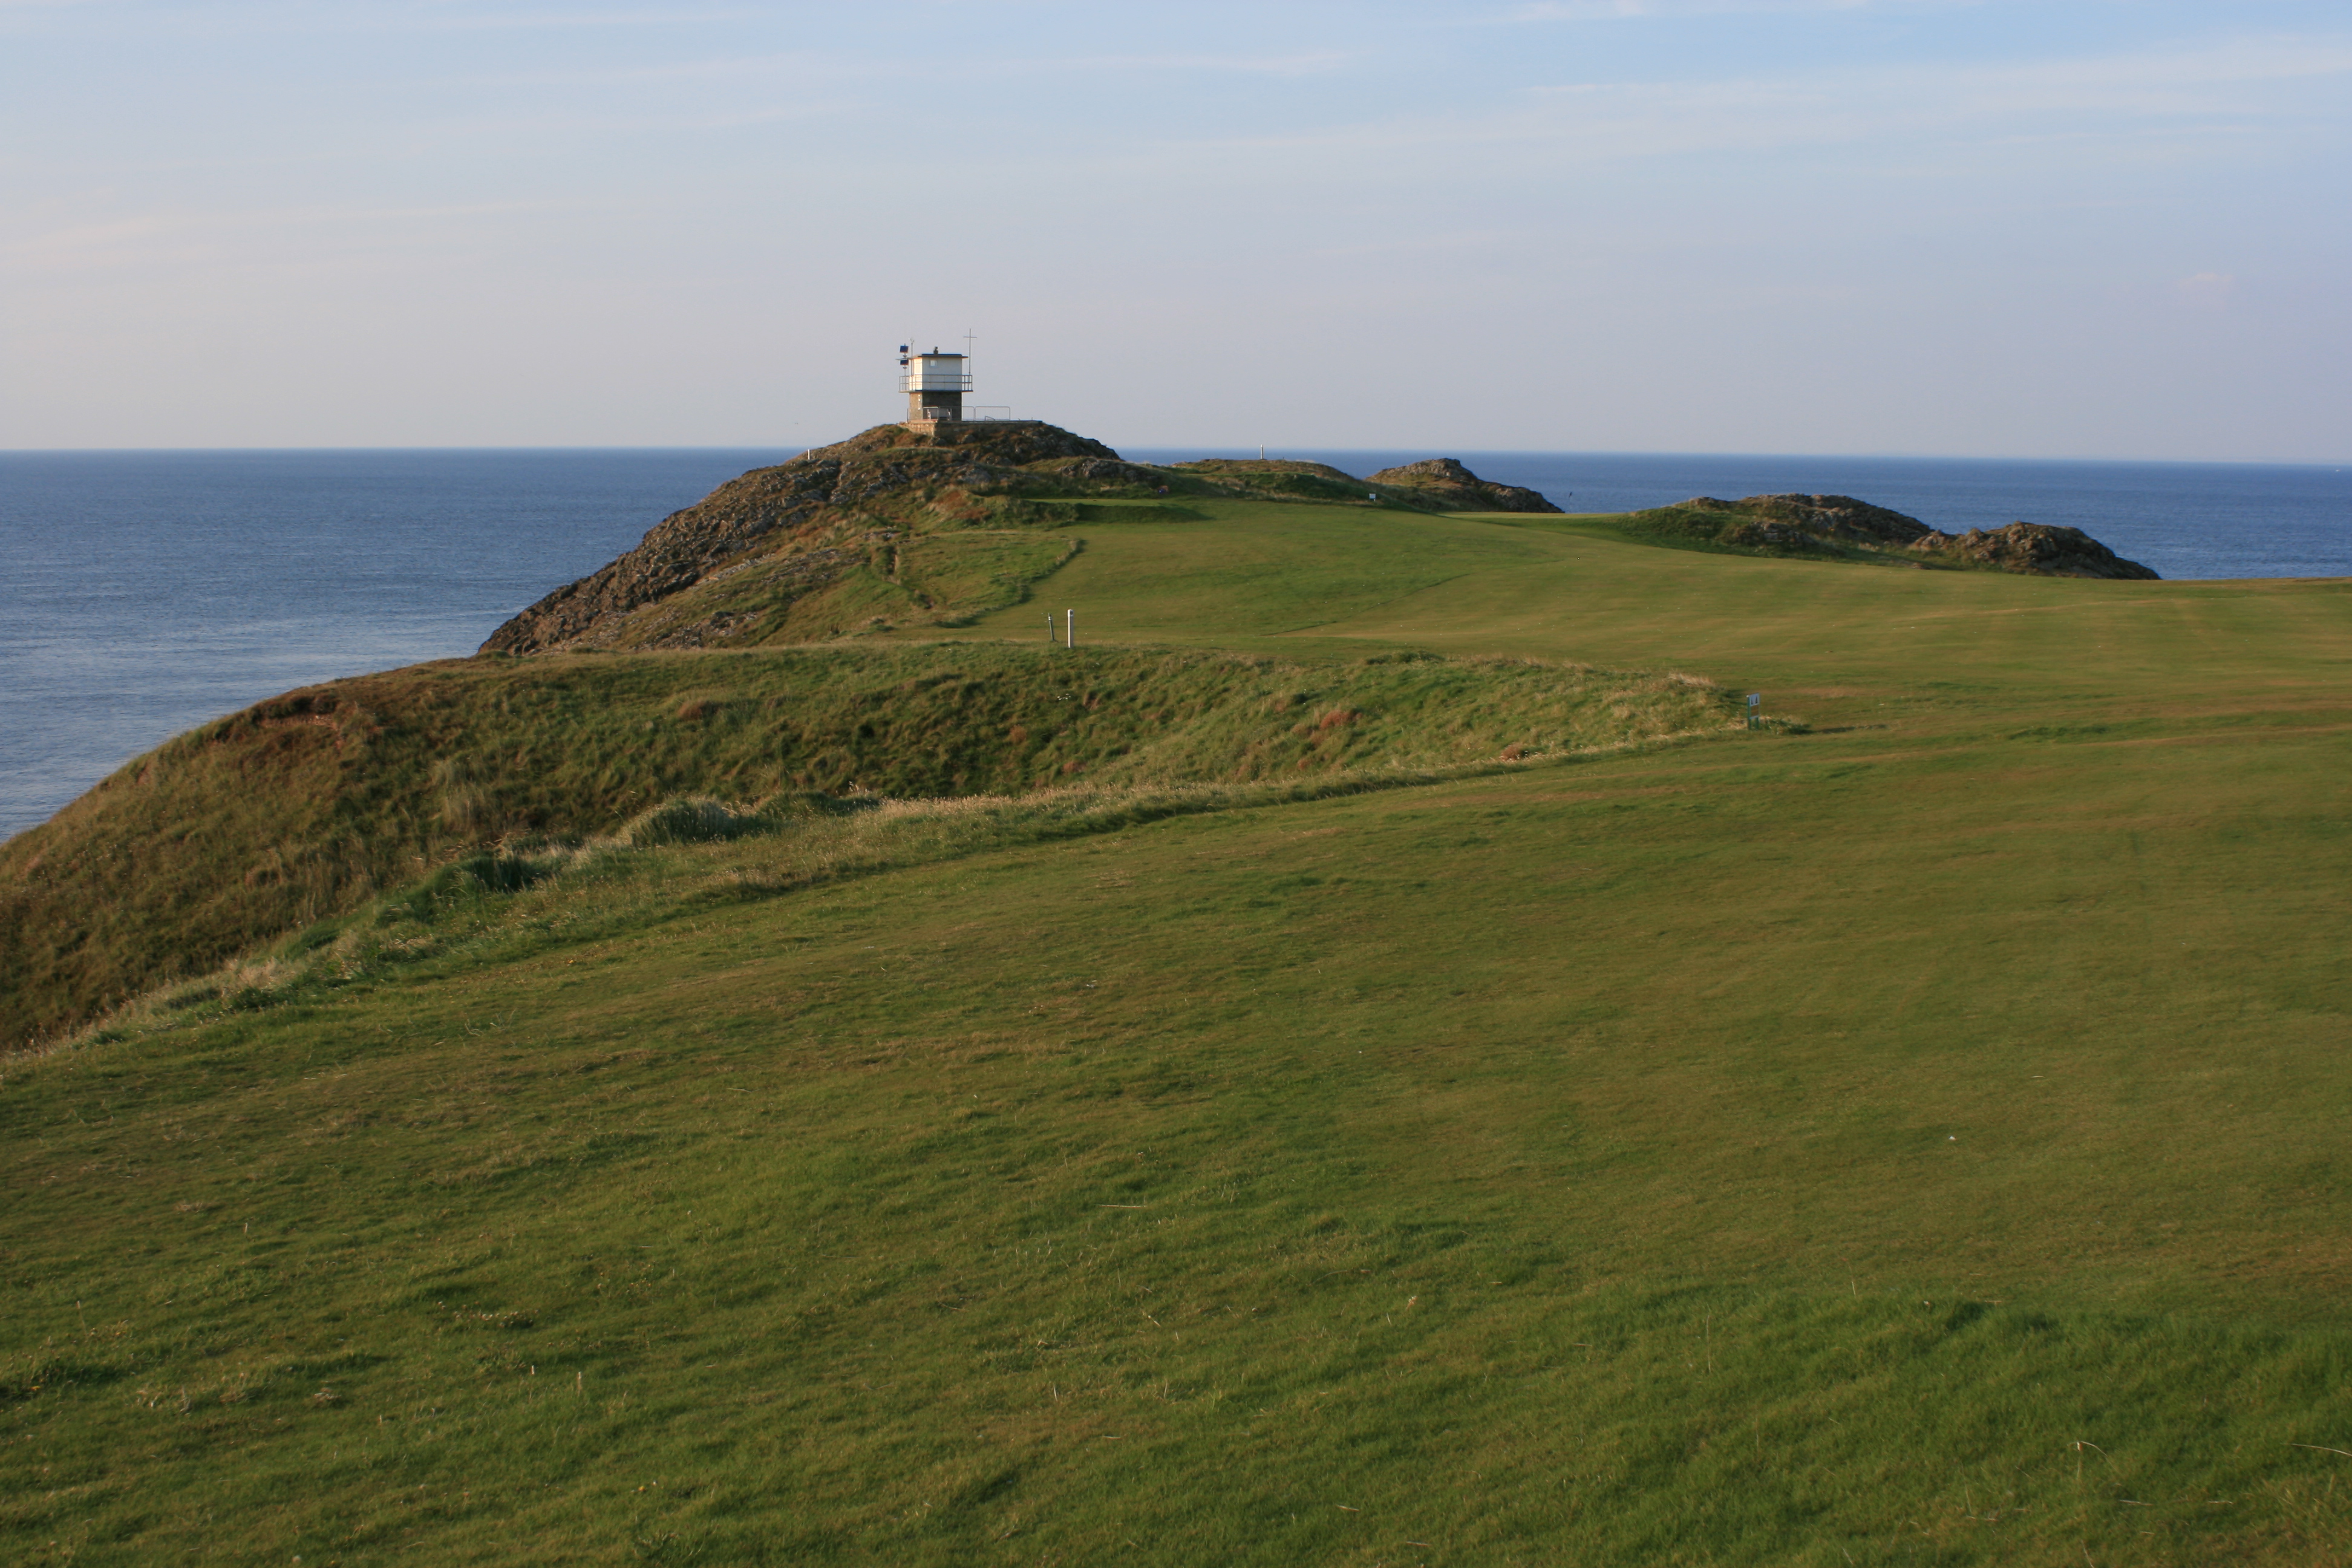 Wales, day three: Fabulous views, memorable holes and some quirks at Nefyn & District Golf Club